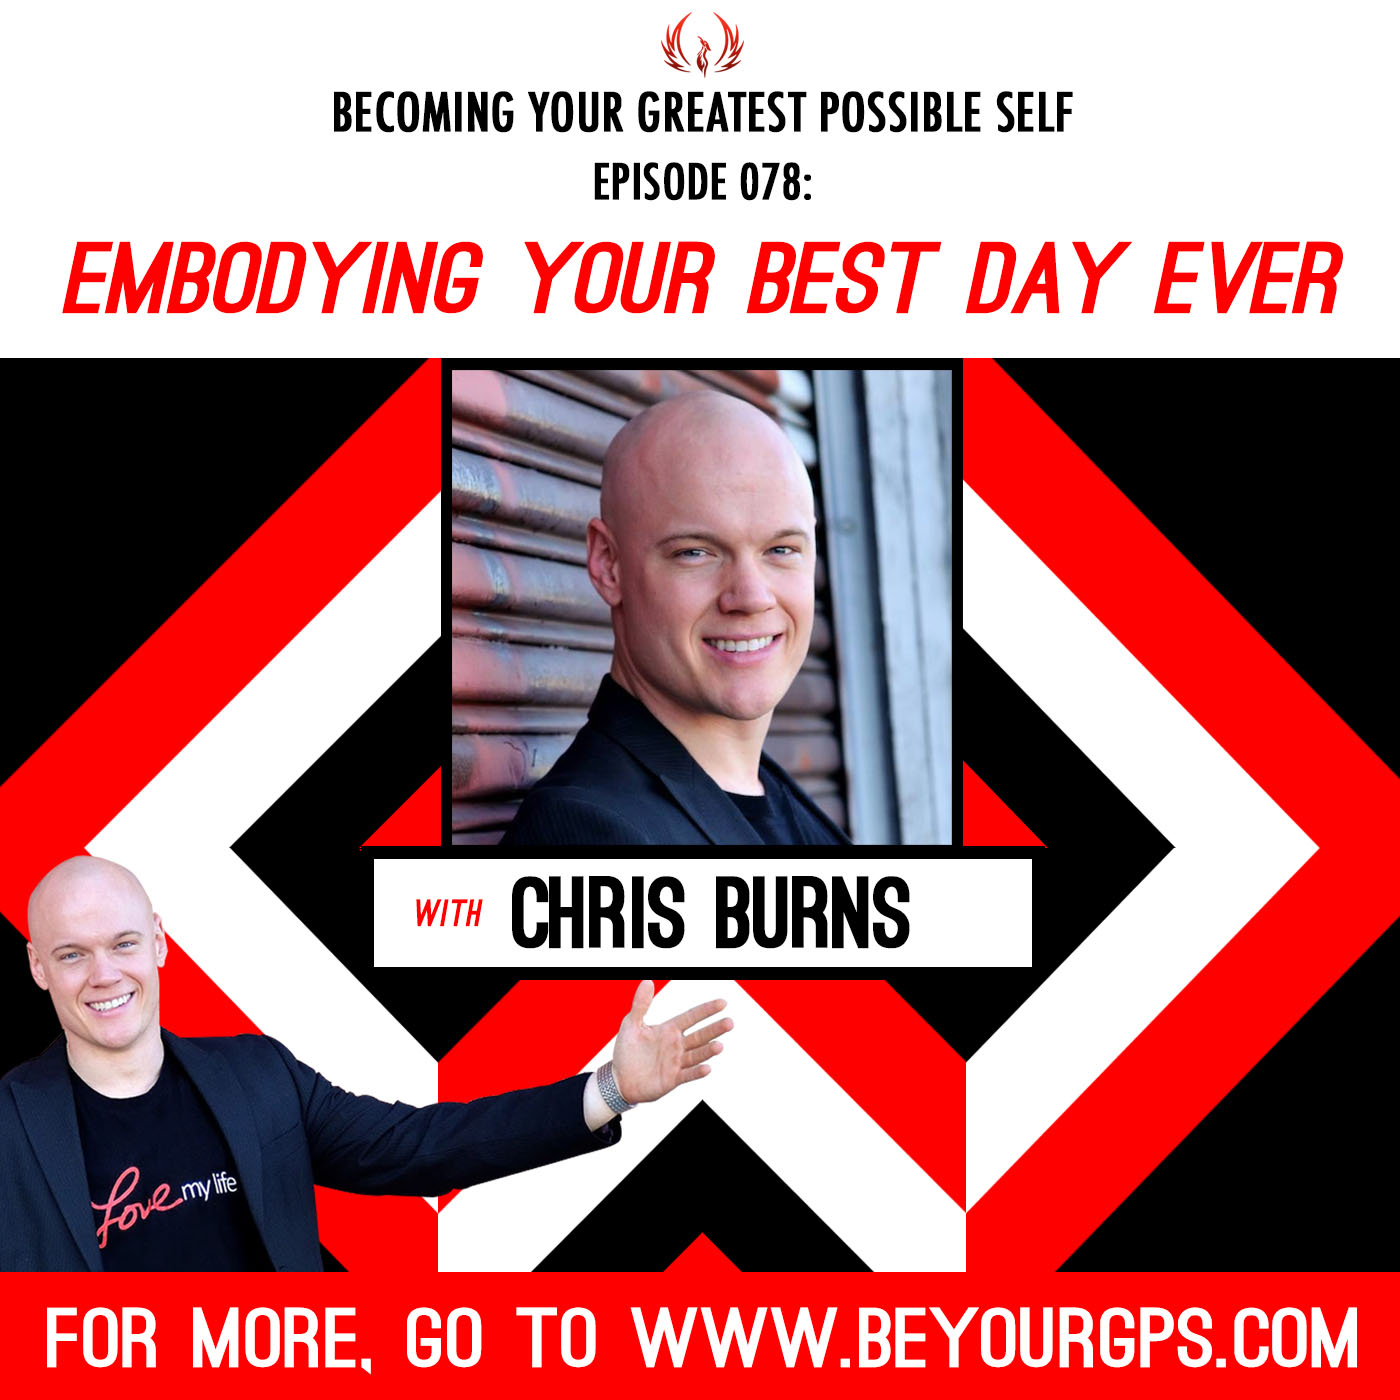 Embodying Your Best Day Ever with Chris Burns